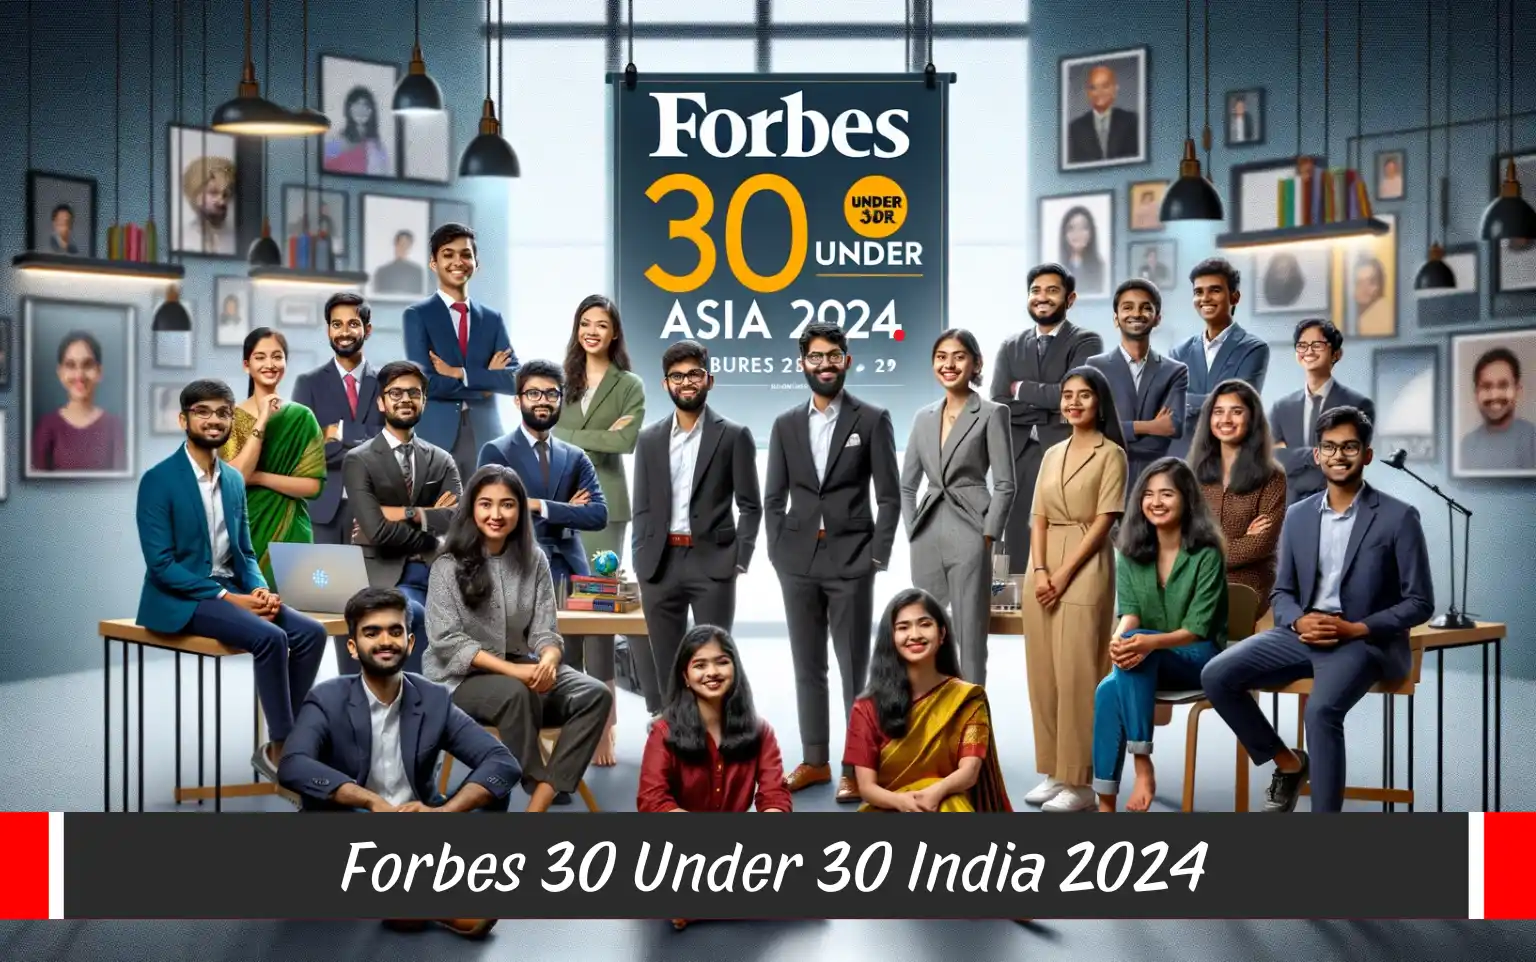 Poster Make Via Ai Forbes 30 Under 30 India 2024 Check Out Forbes 30 Under 30 Asia list is Here